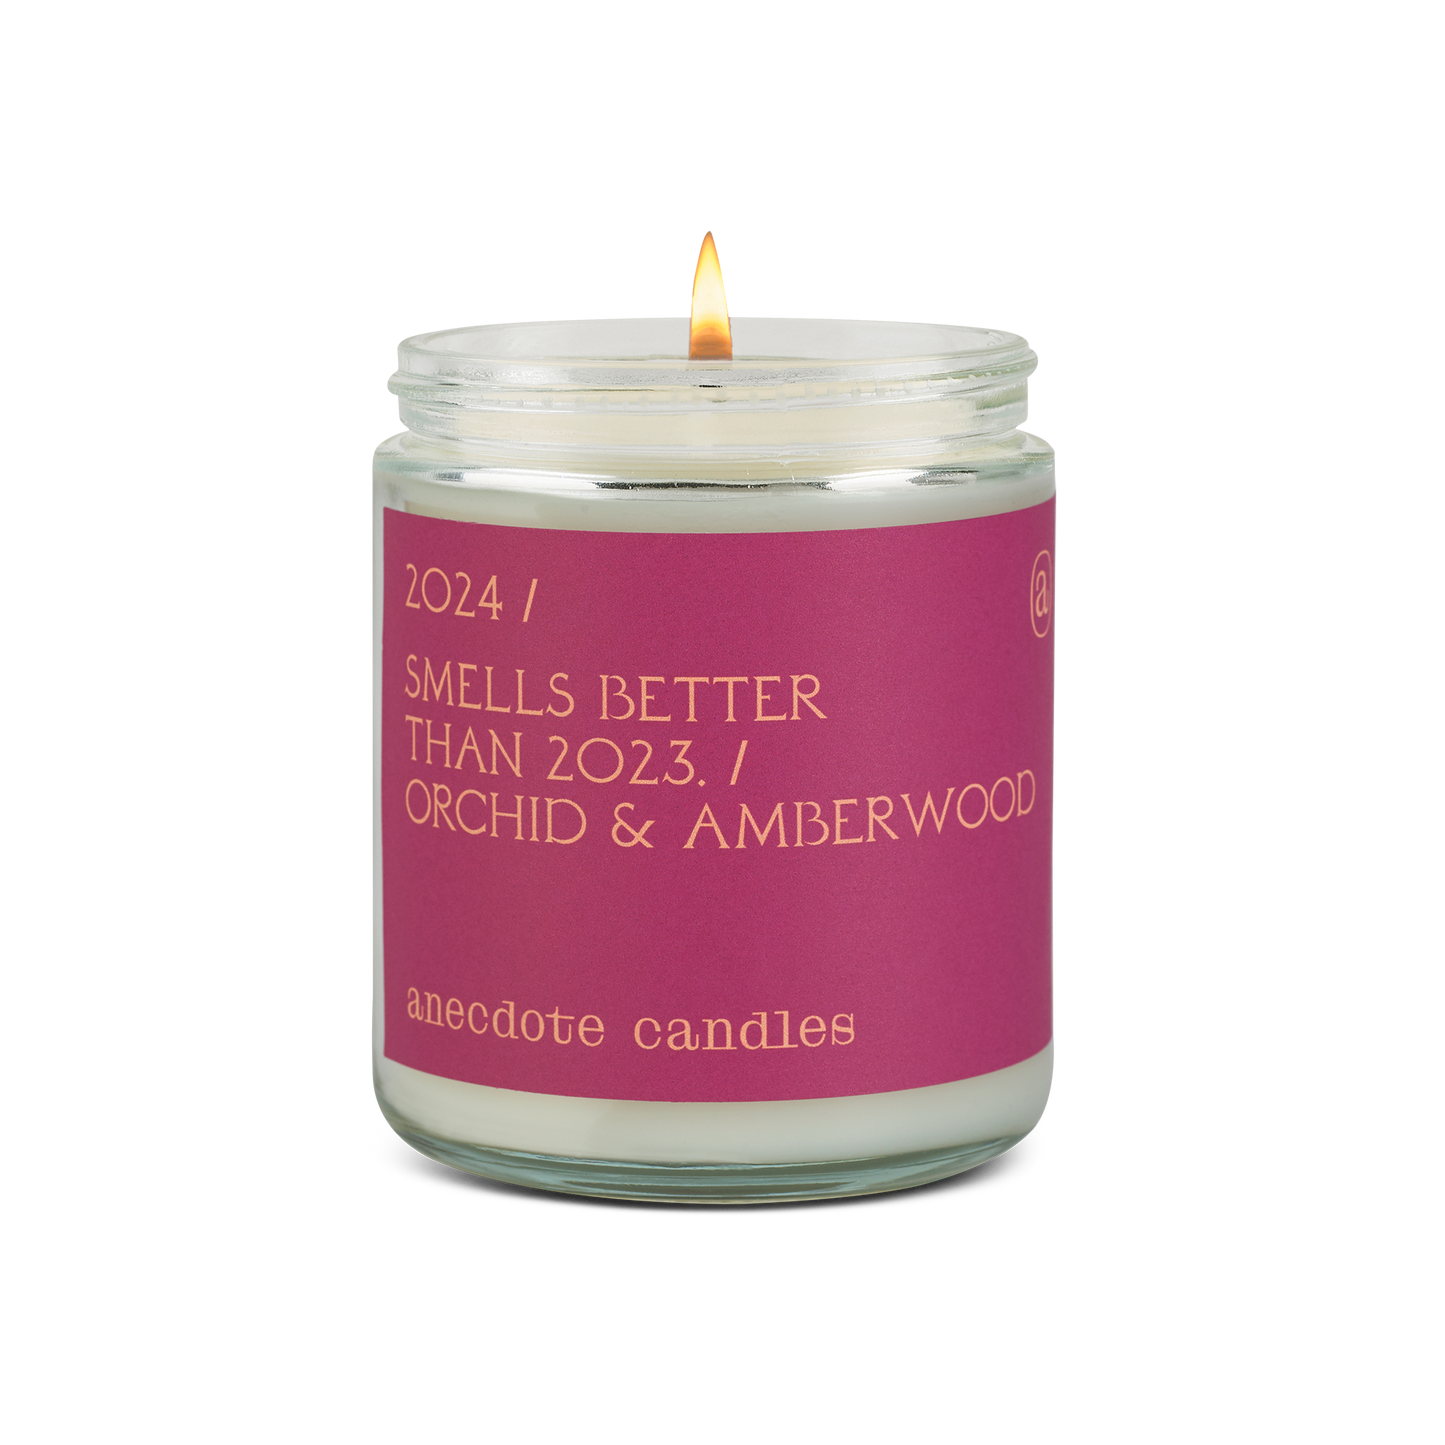 2024 Candle Orchid & Amberwood Scent